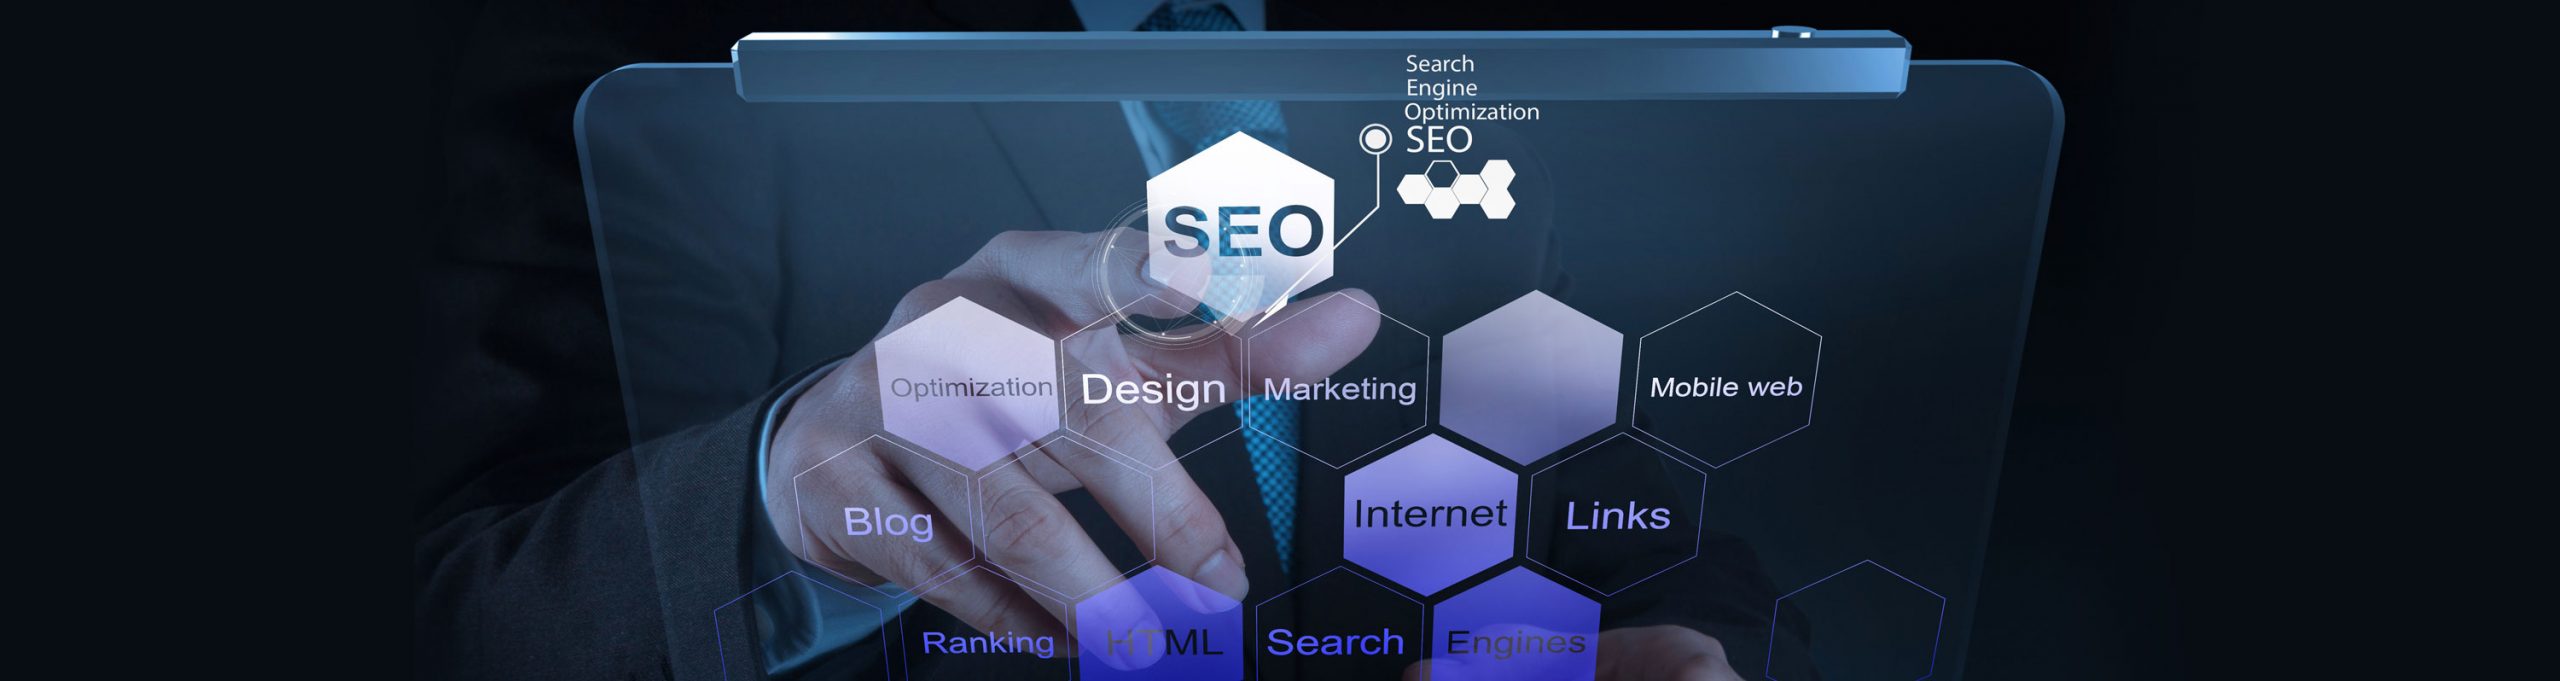 What Is Technical SEO? How Important Is It for Content and its Rankings?